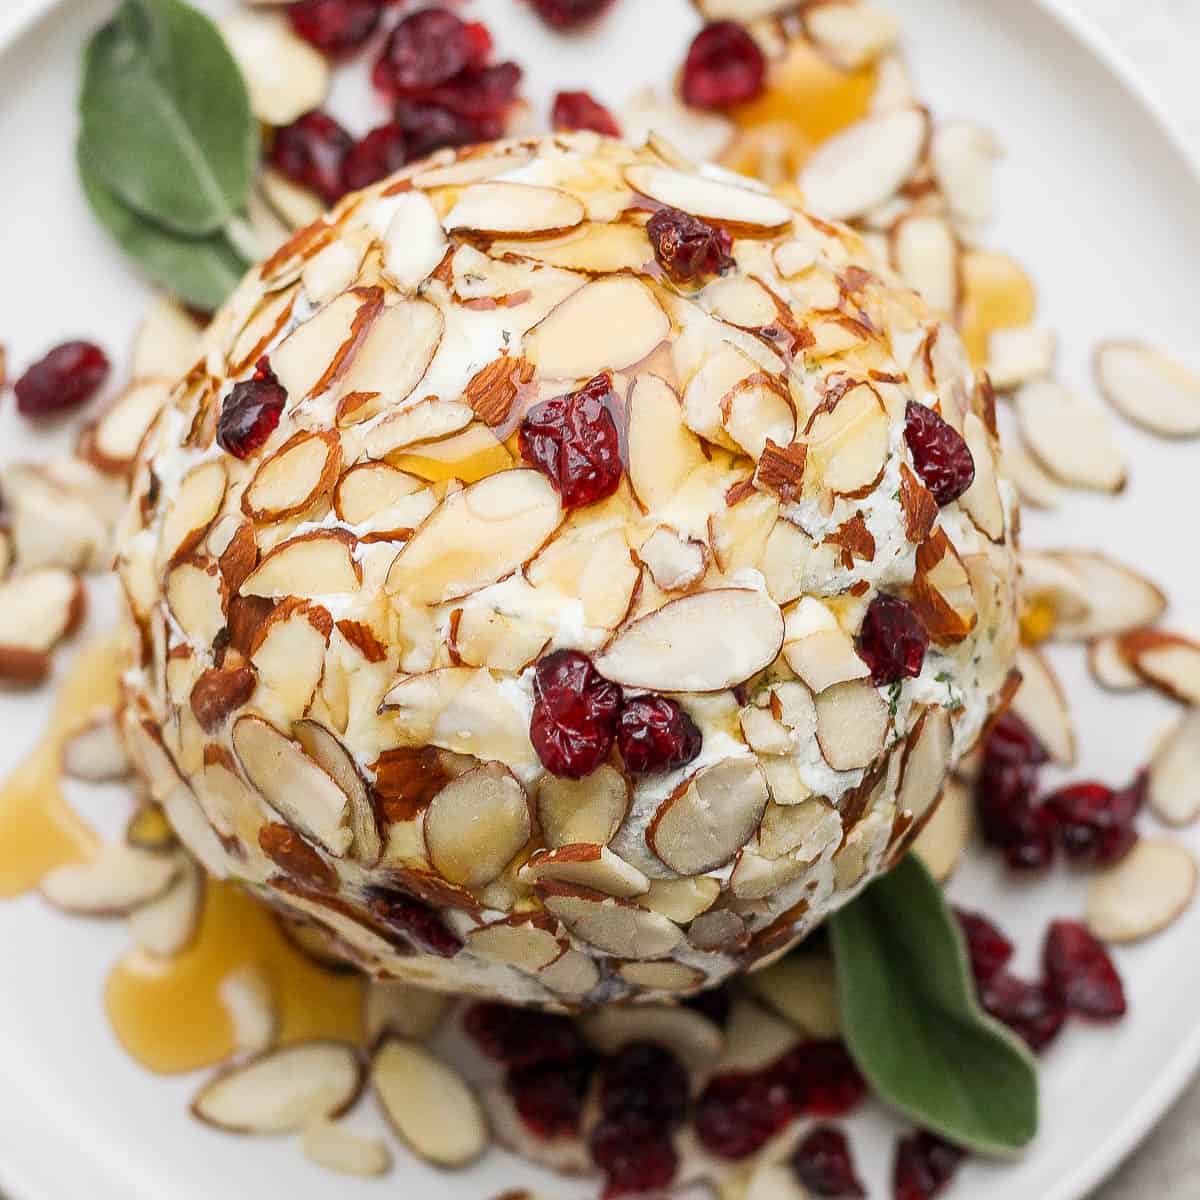 A goat cheese ball coated with slivered almonds and cranberries on a plate with some sage leaves and honey.